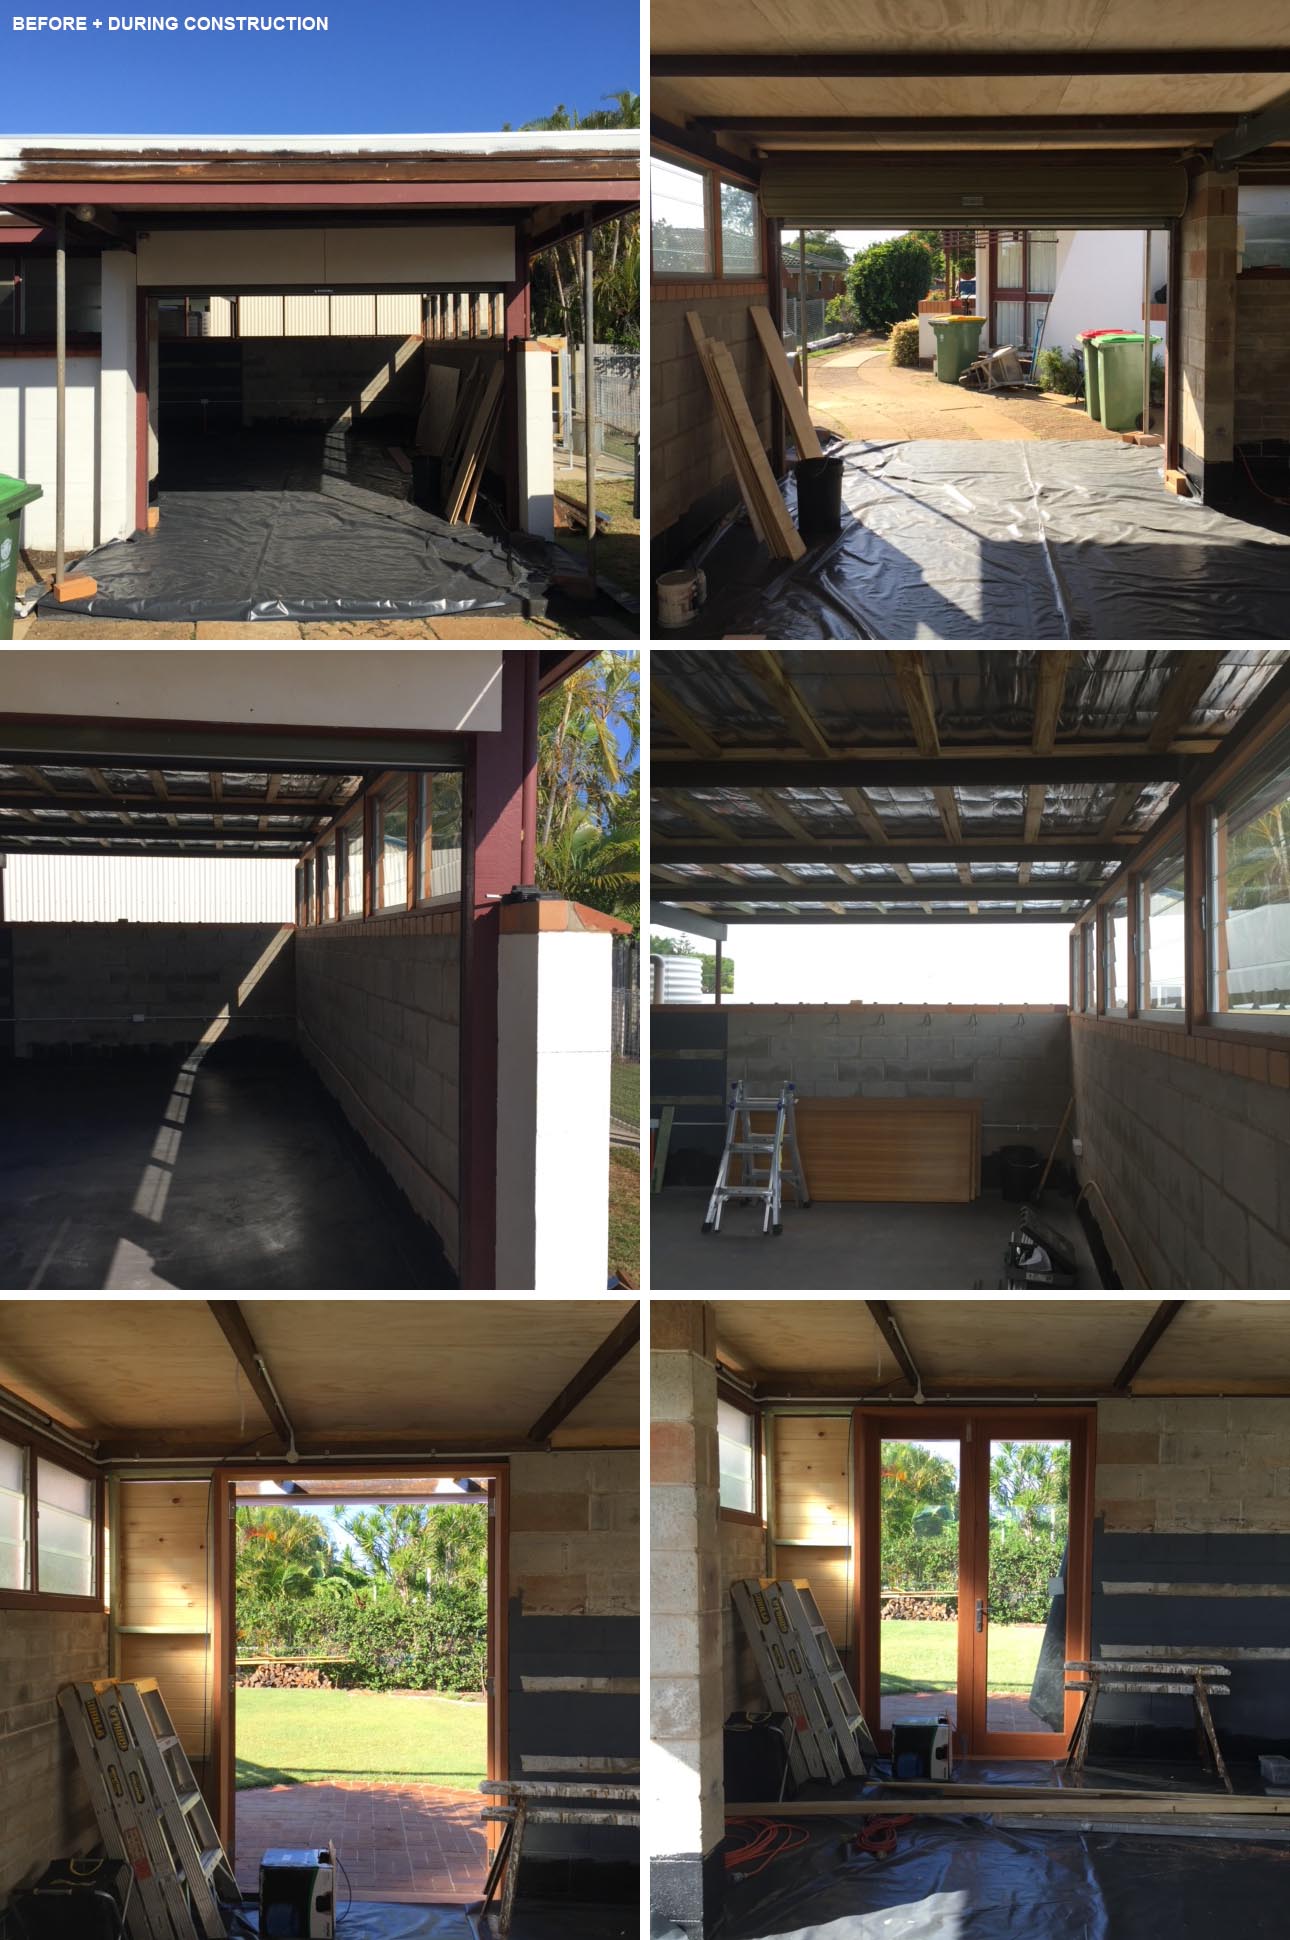 BEFORE PHOTOS - A converted carport acts as an office for 4-5 people, and can be transformed into a secondary suite if needed one day.